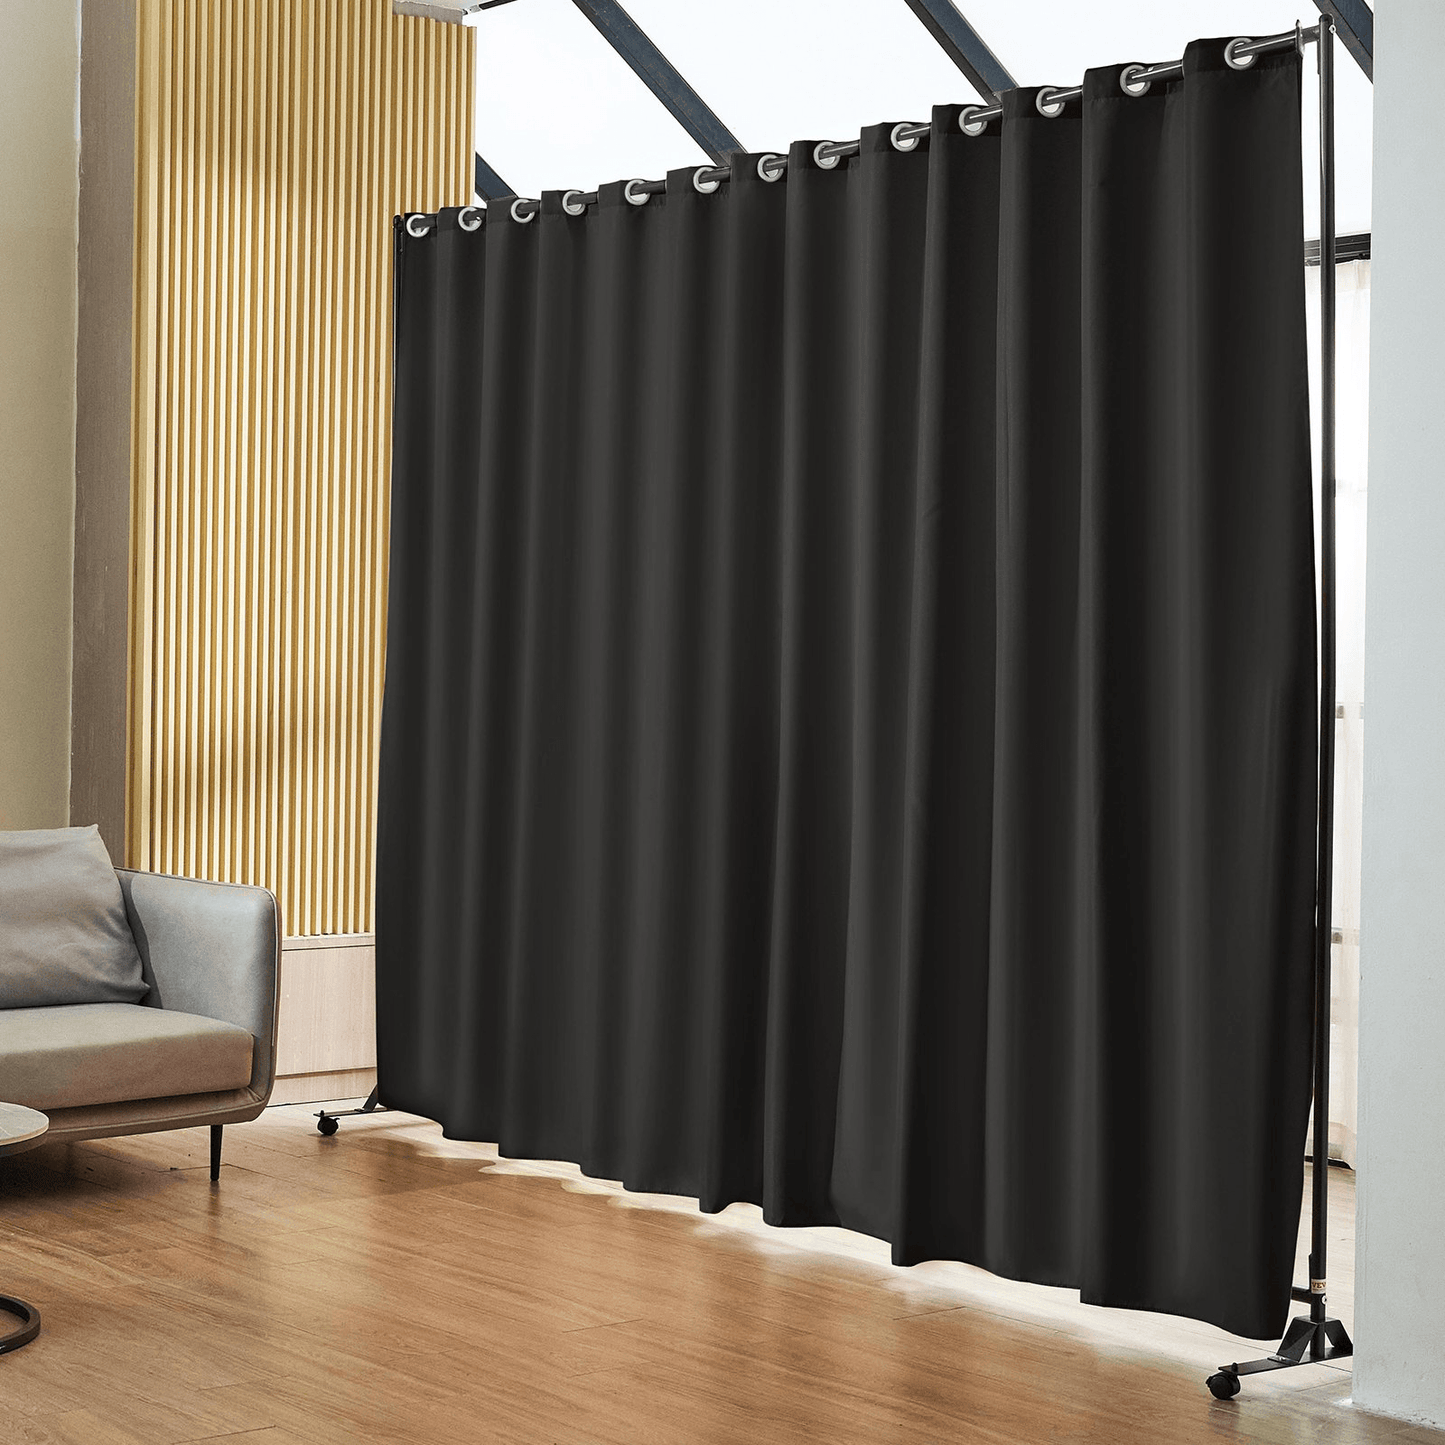 VEVOR Room Divider, 8 ft x 10 ft Portable Panel Room Divider with Wheels Curtain Divider Stand, Room Divider Privacy Screen for Office, Bedroom, Dining Room, Study, Black - Loomini